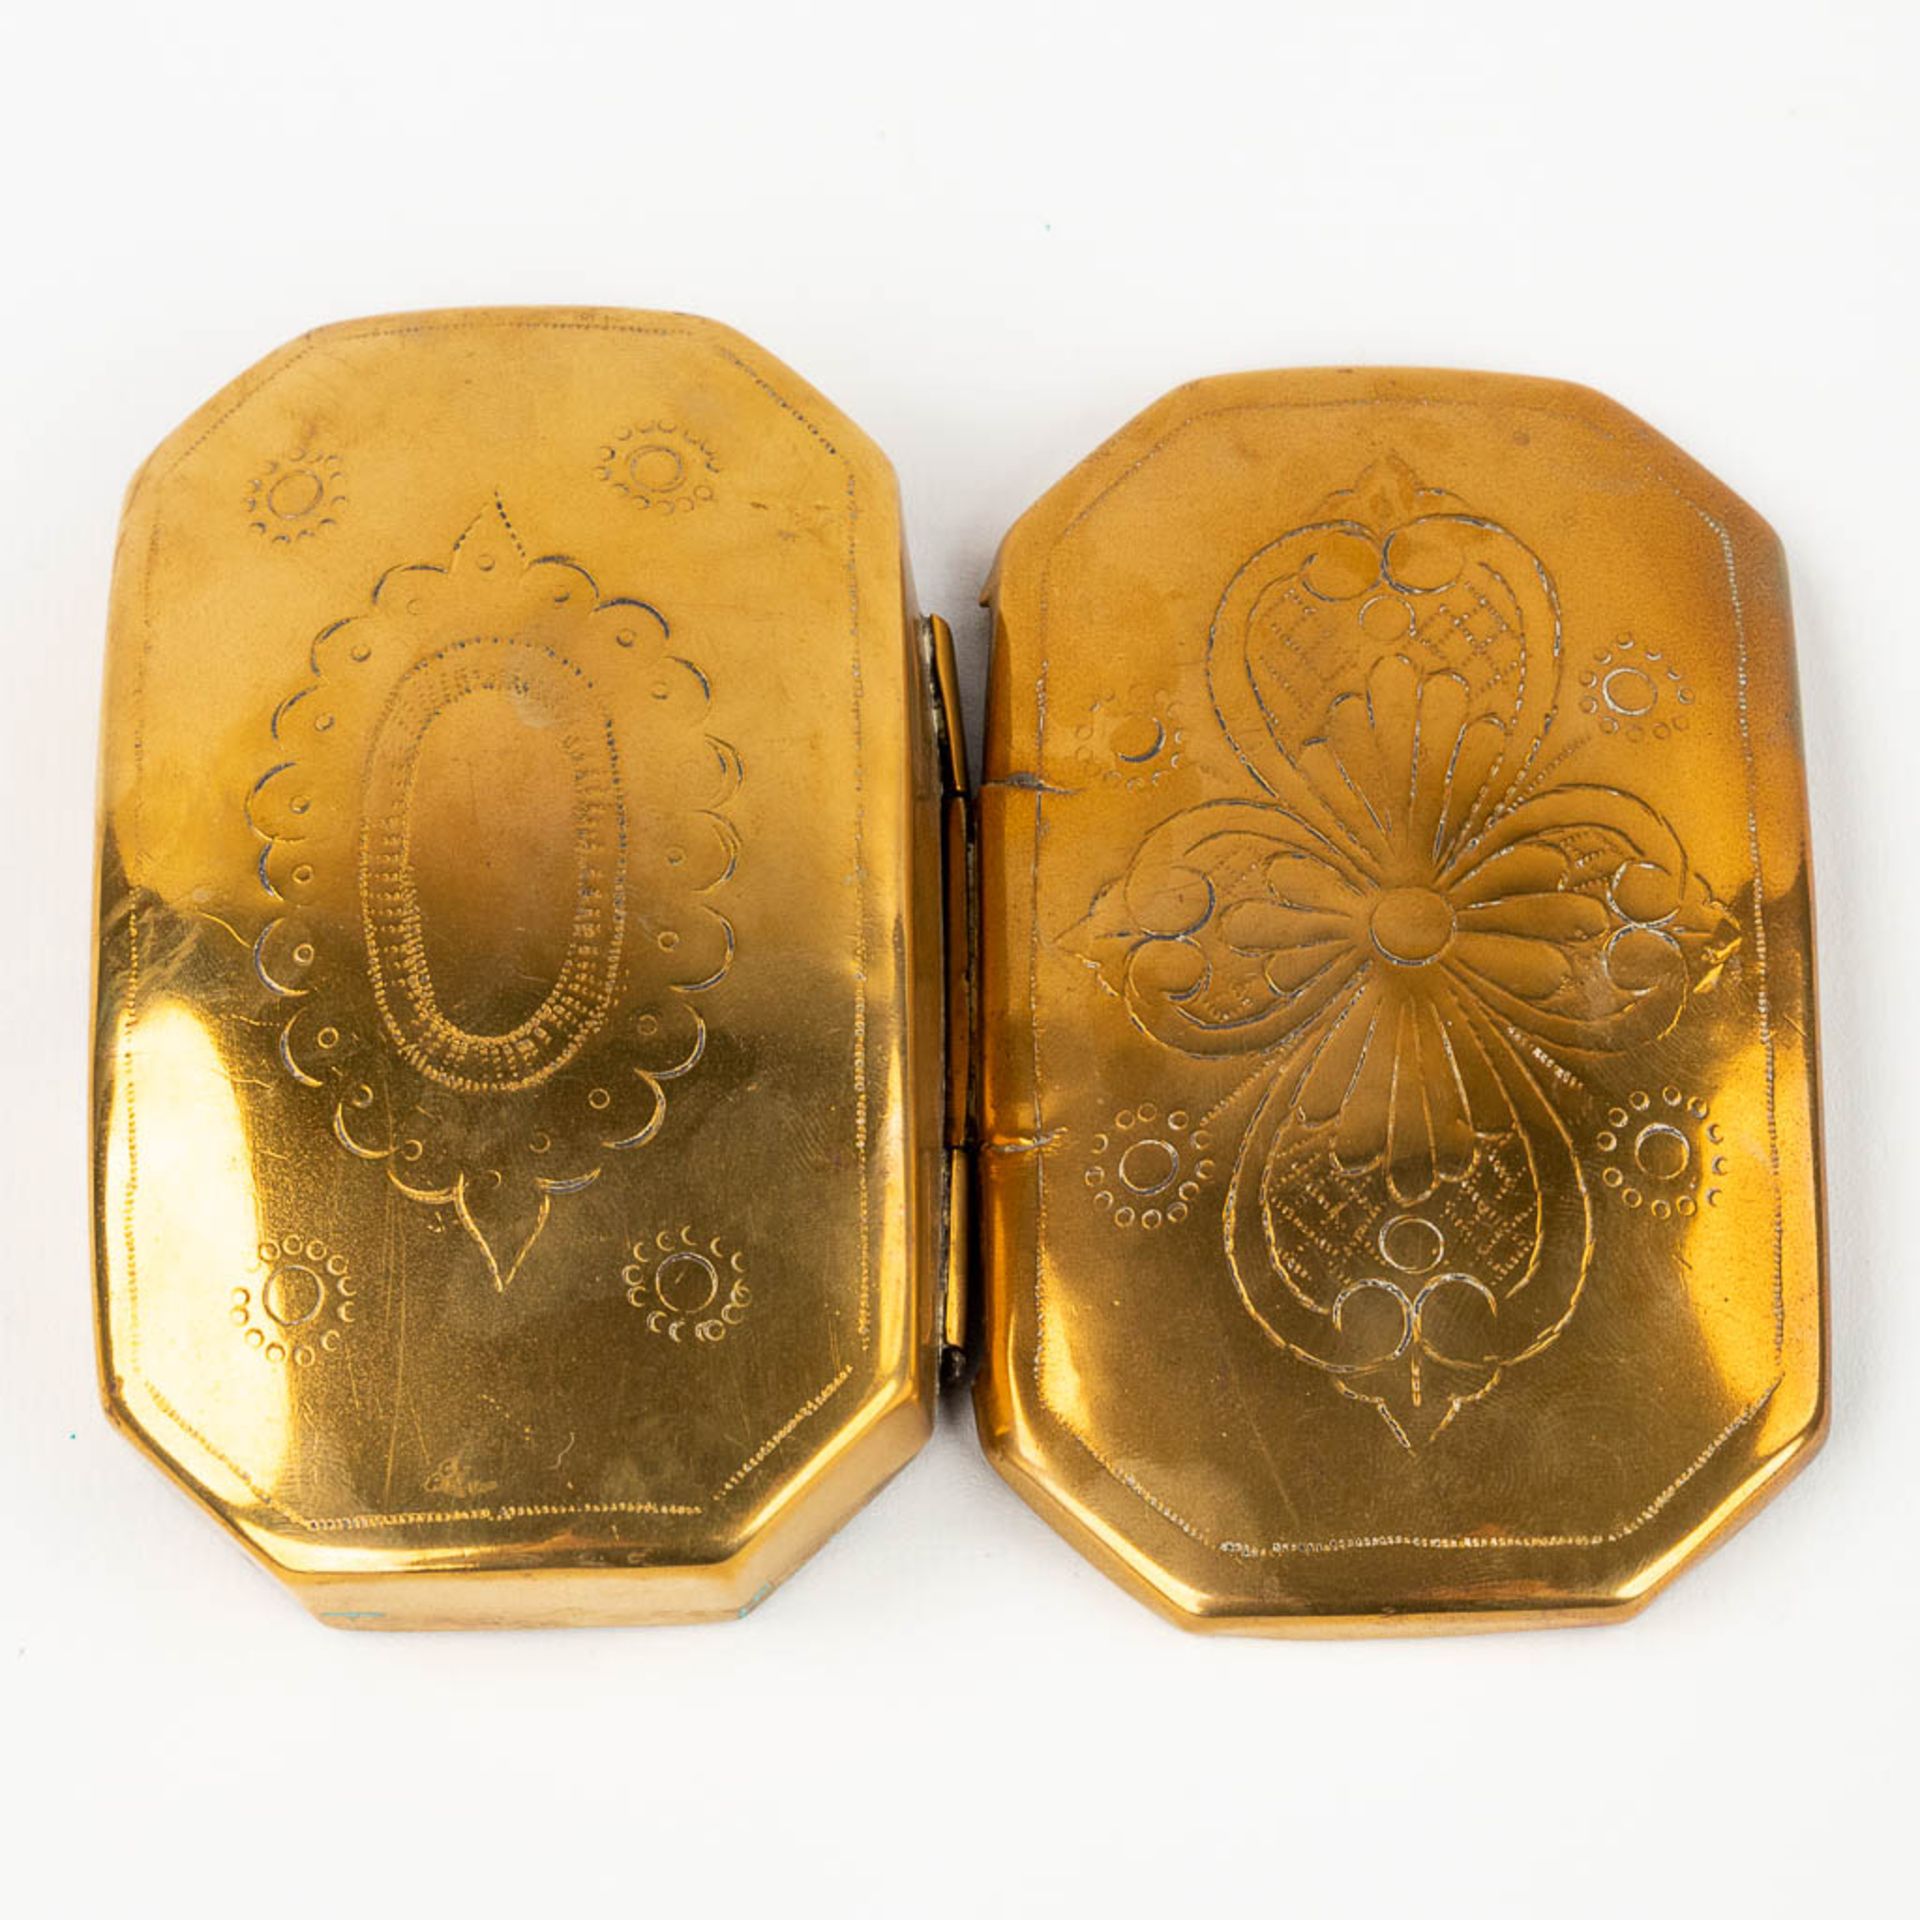 A collection of 3 antique oval tobacco boxes, made of copper. 18th/19th C. (L: 7 x W: 12 x H: 3,5 cm - Image 7 of 13